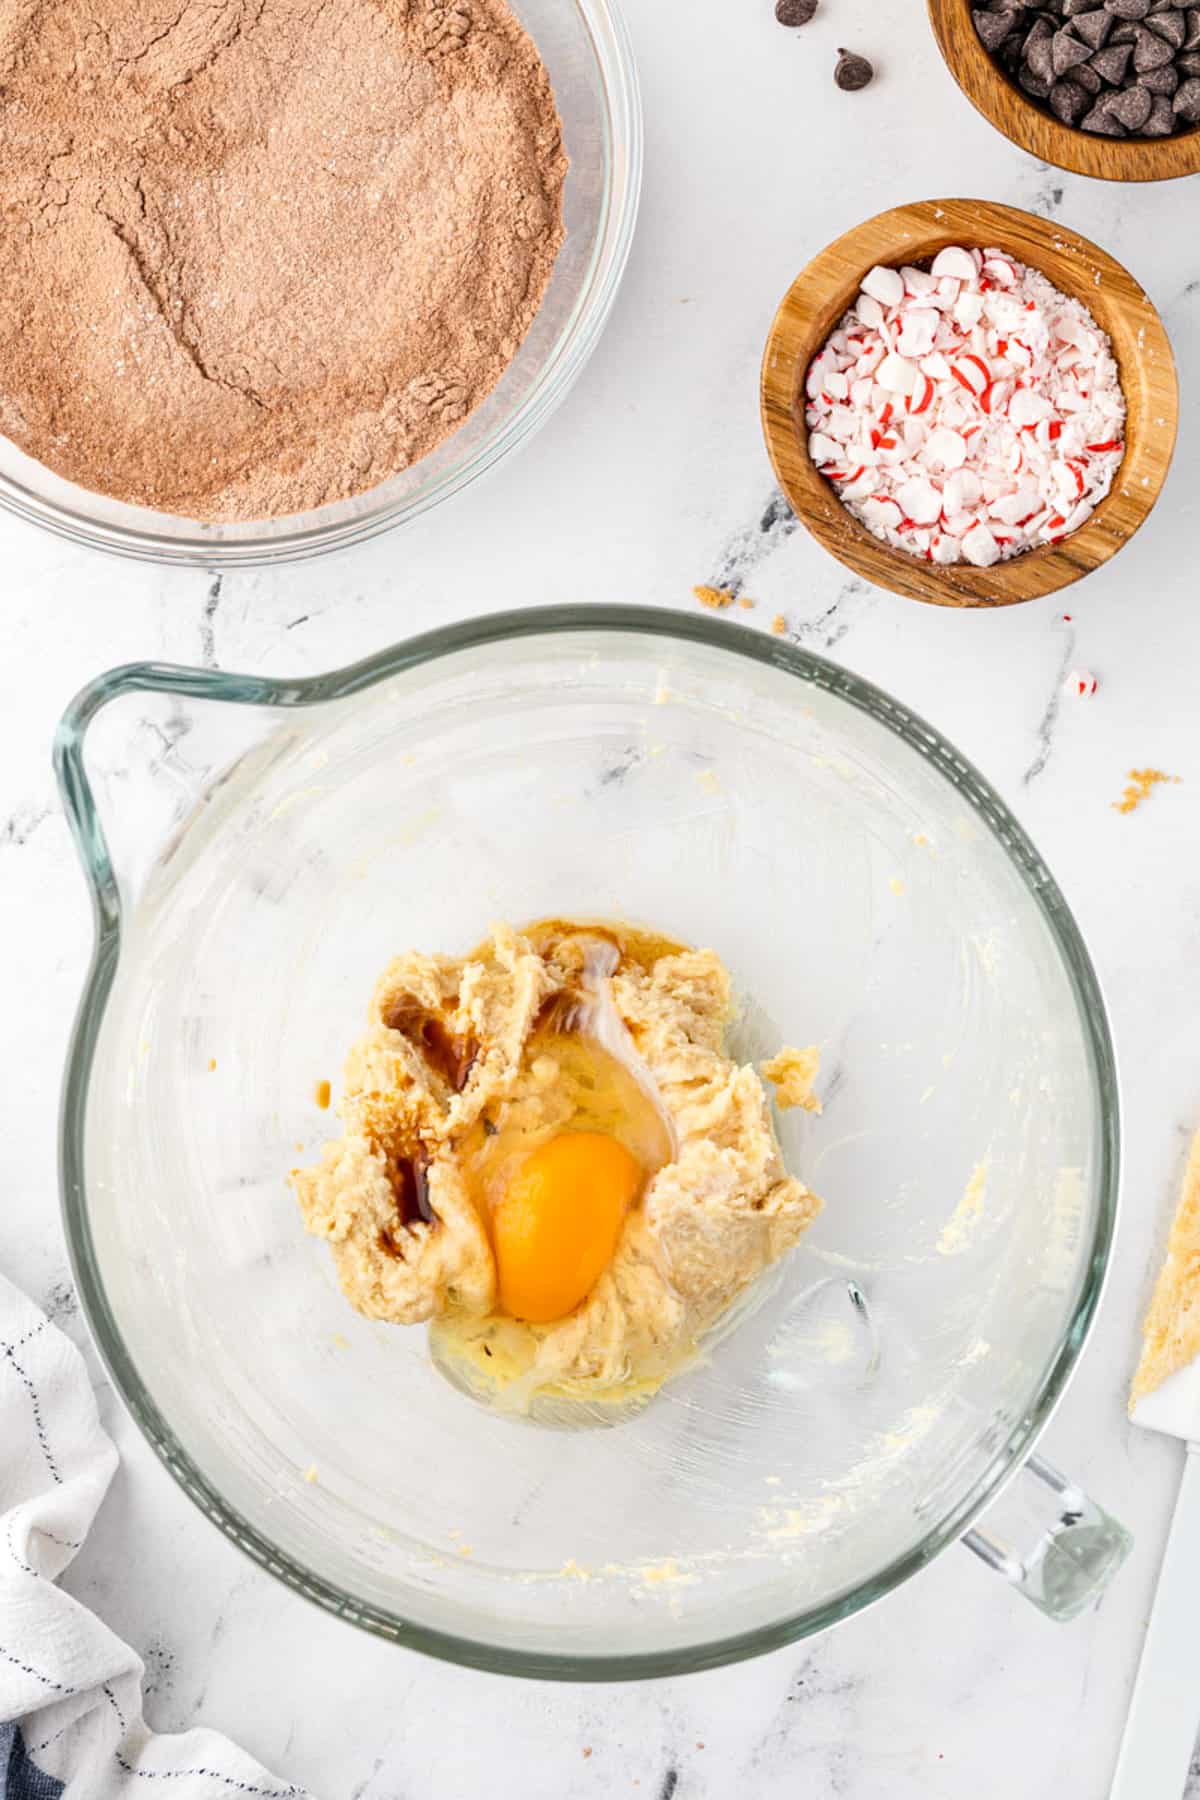 Egg in bowl with creamed cookie ingredients